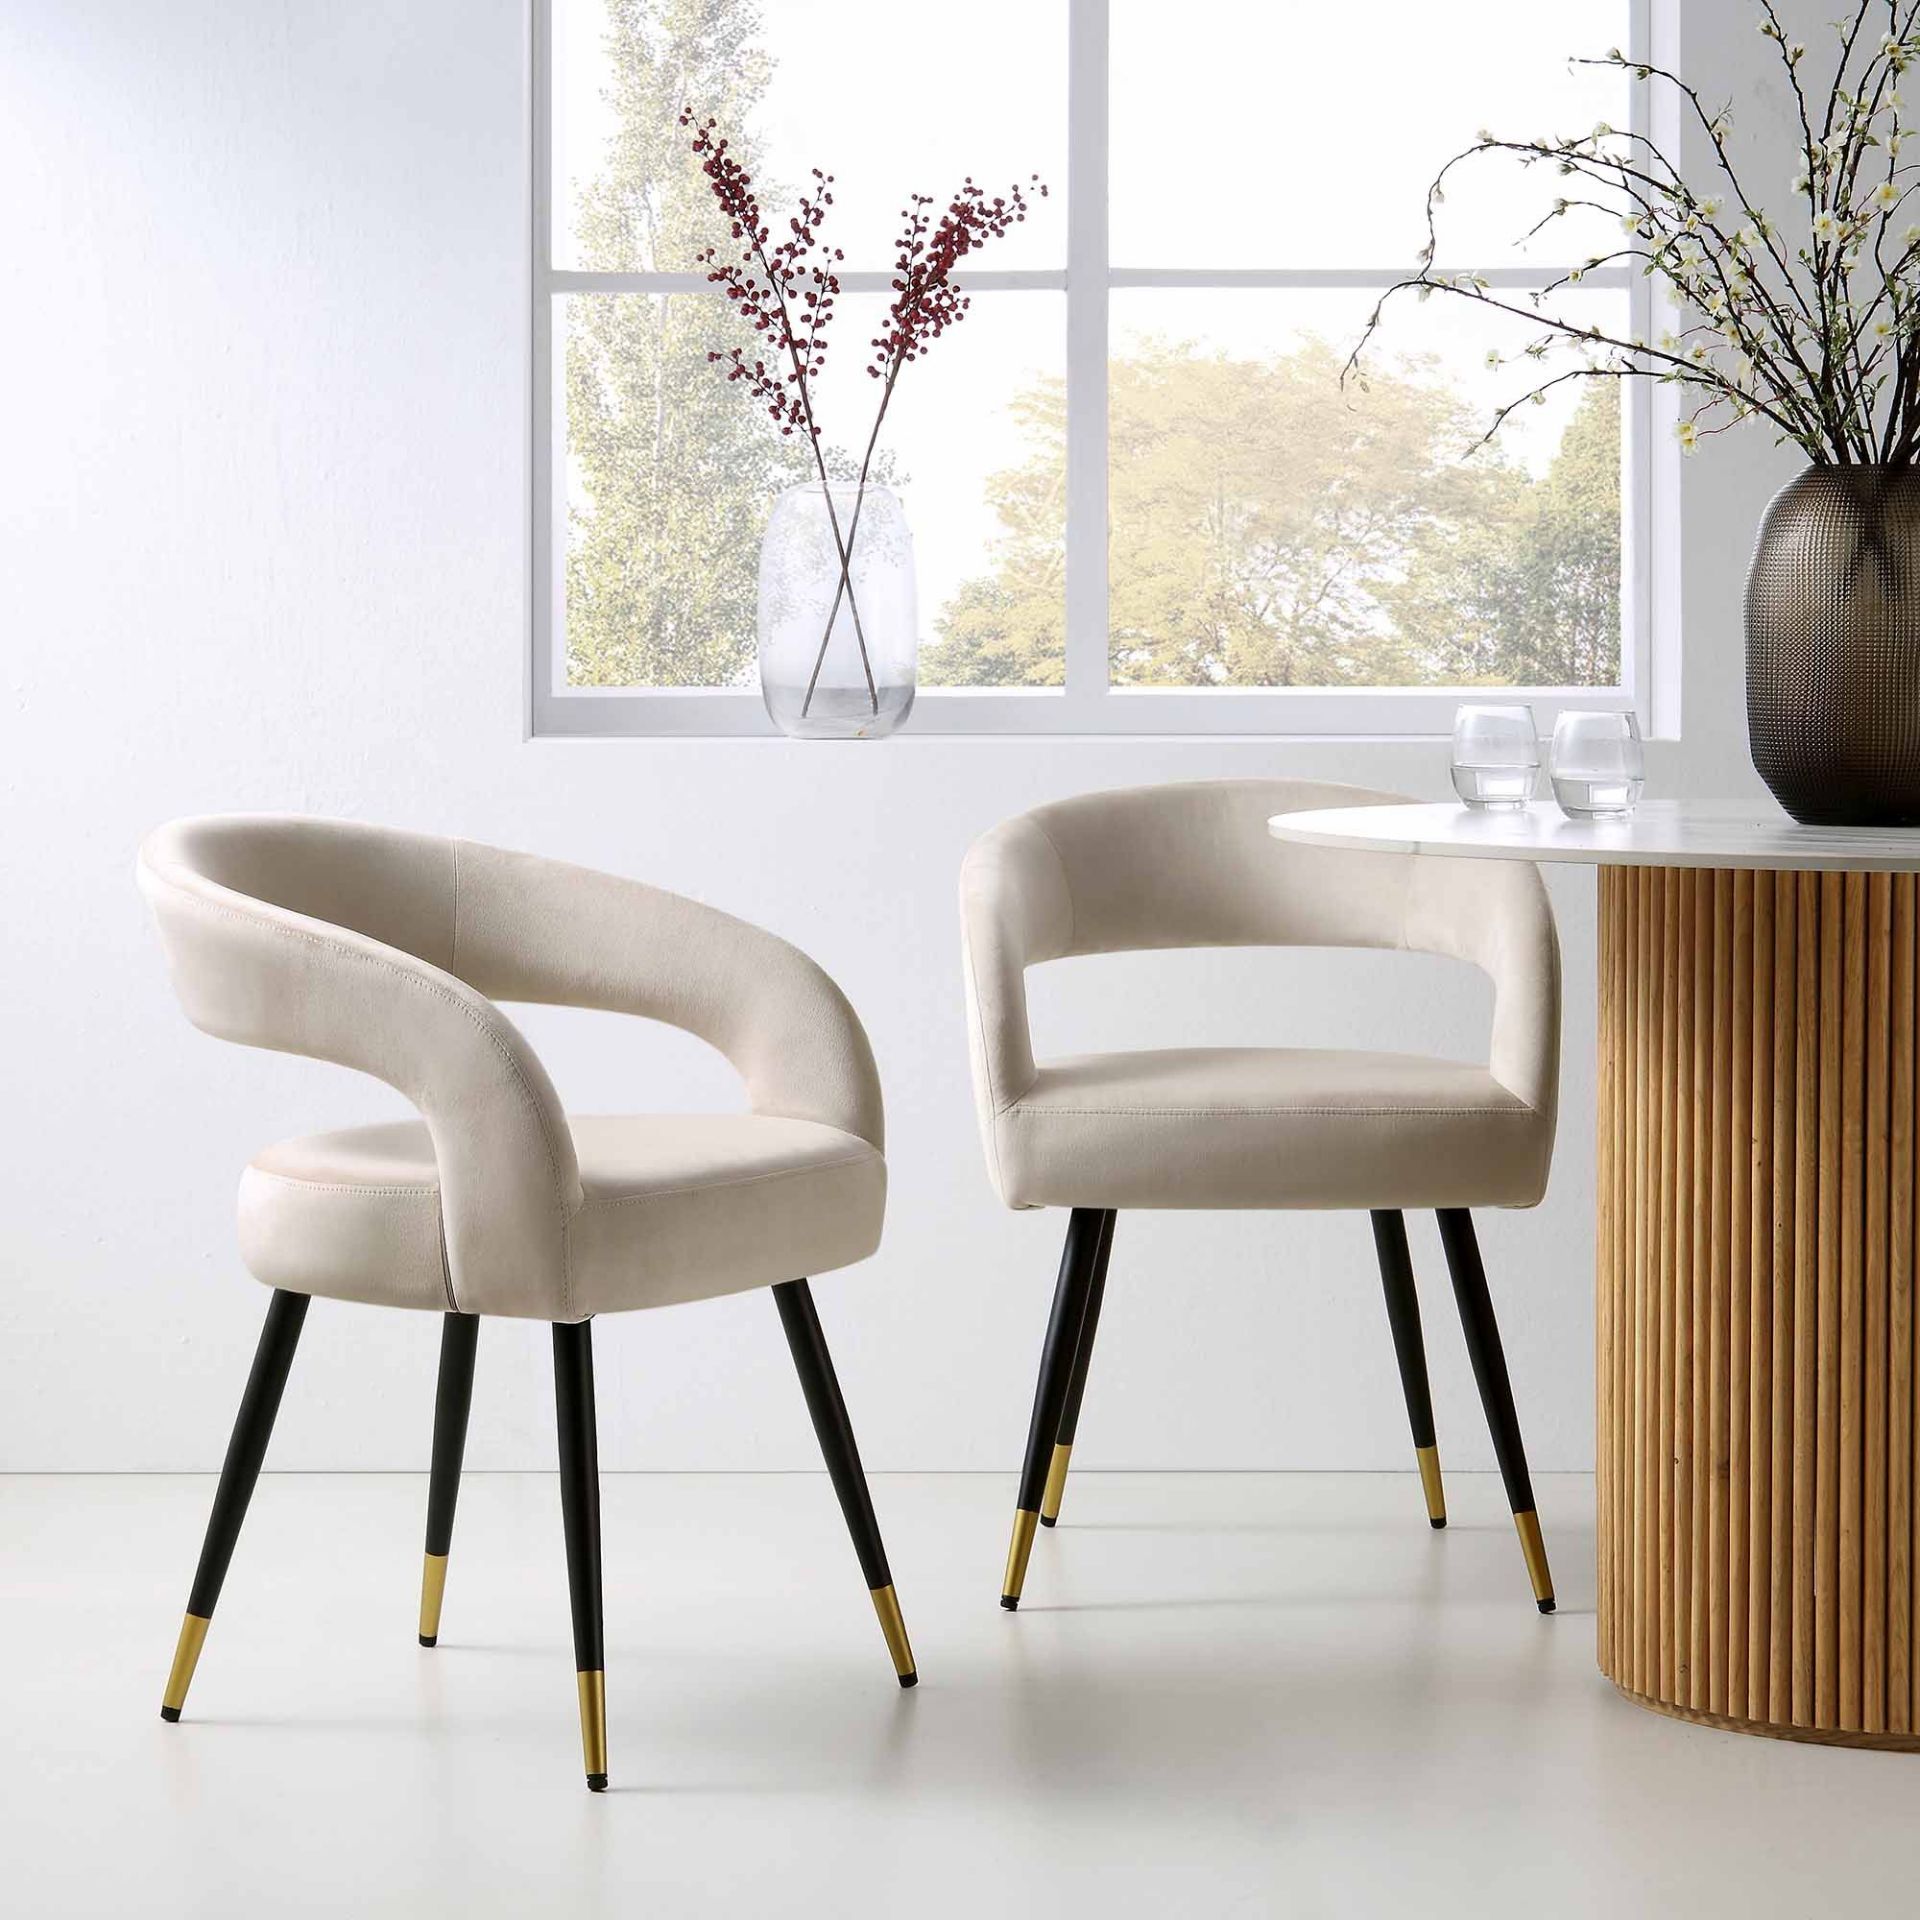 Laurel Wave Champagne Velvet Set of 2 Dining Chairs. - R14BW. RRP £259.99. The curved cut out